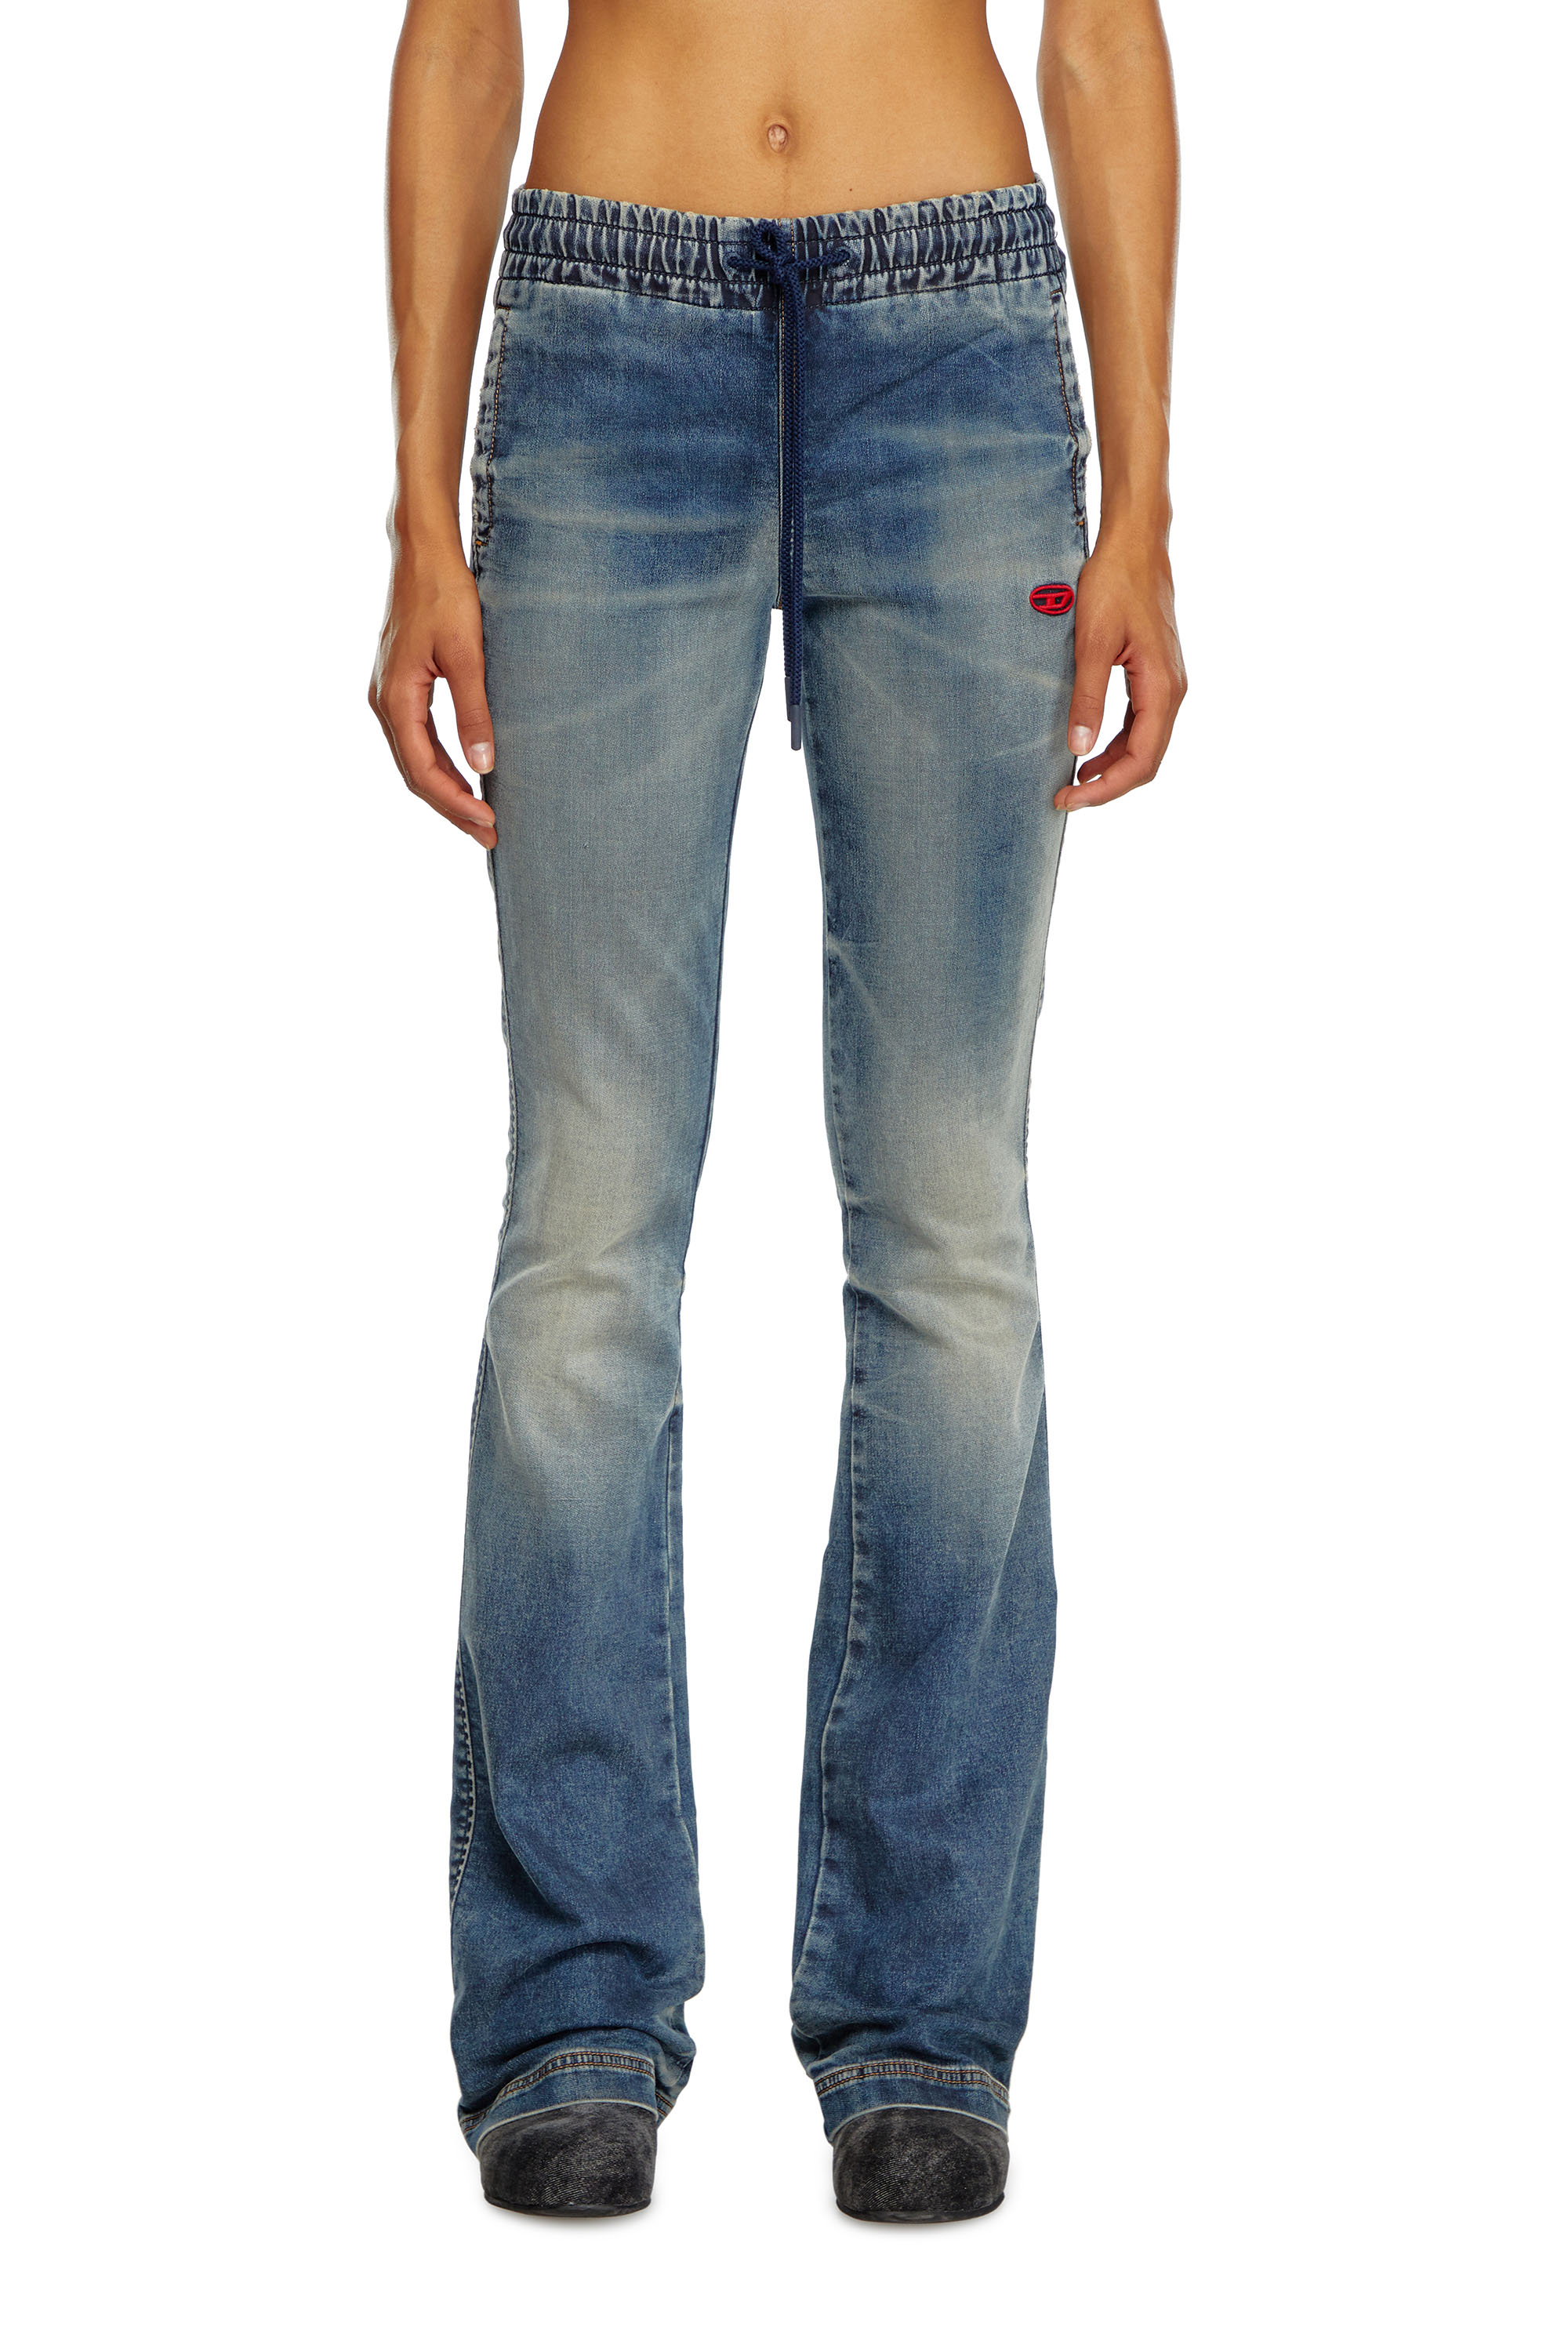 Diesel - Bootcut and Flare 2069 D-Ebbey Joggjeans® 068LZ, Mujer Bootcut y Flare 2069 D-Ebbey Joggjeans® in Azul marino - Image 2